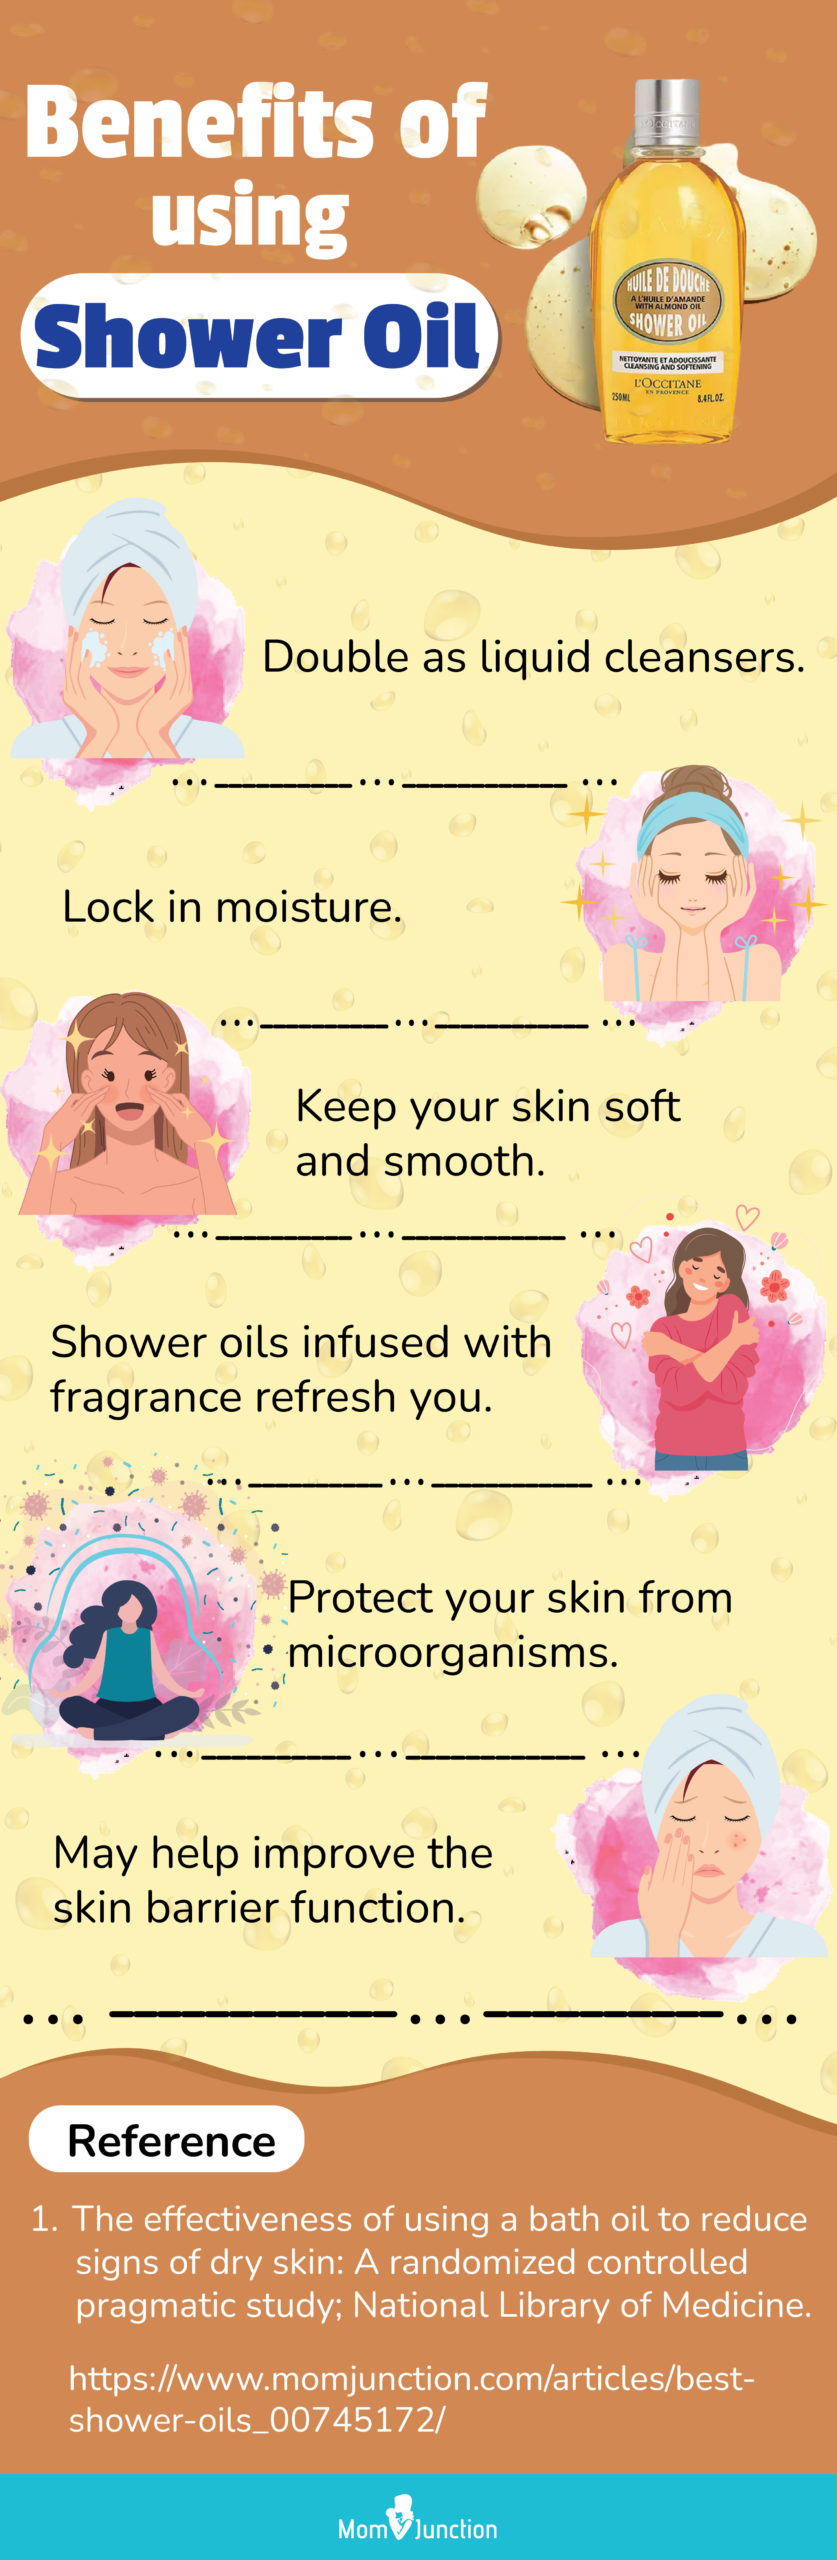 Benefits of using Shower Oil (infographic)